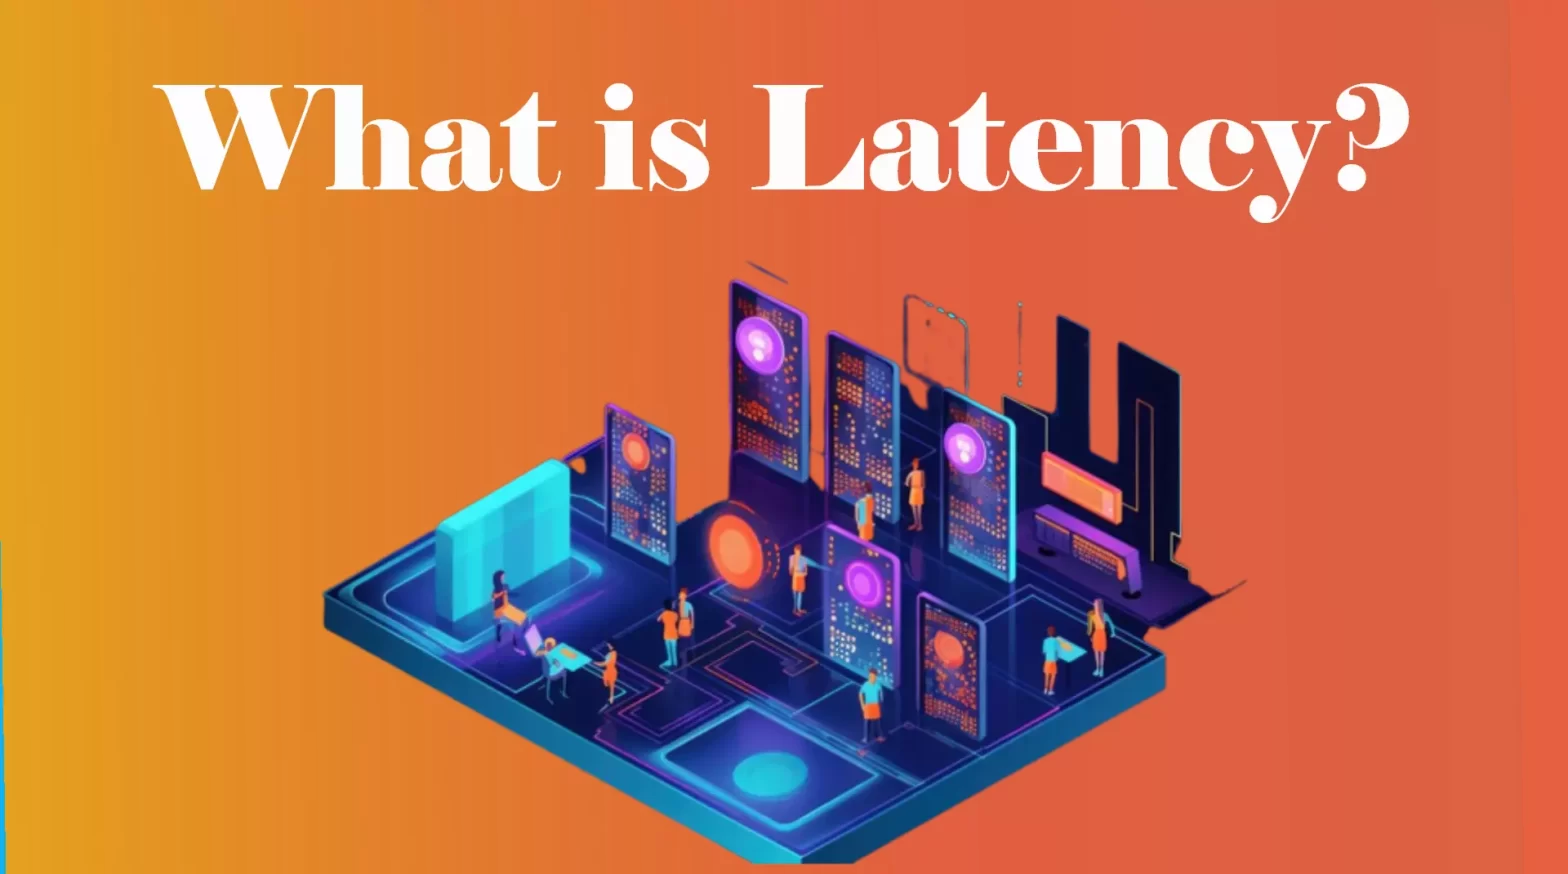 What is Latency